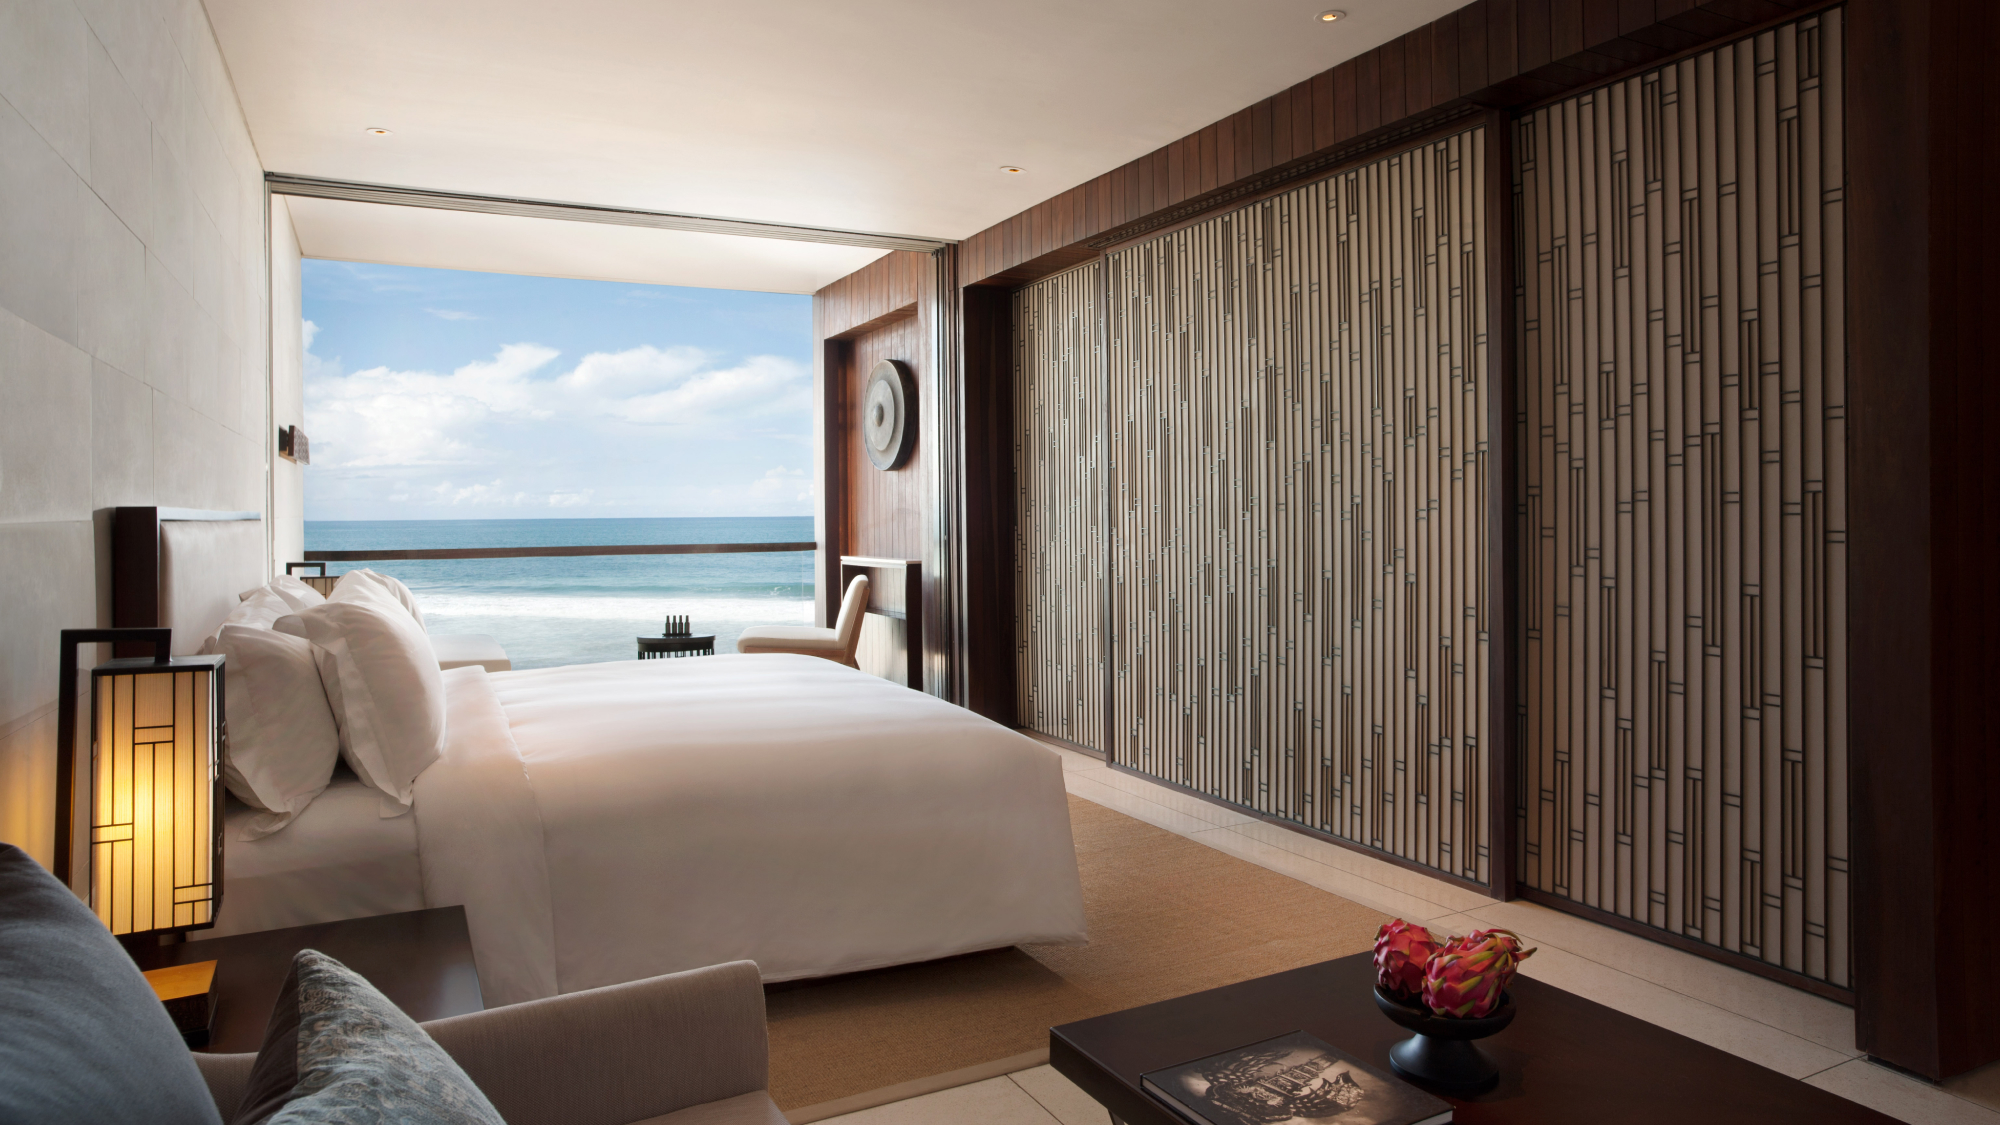 Bed with ocean view suite.